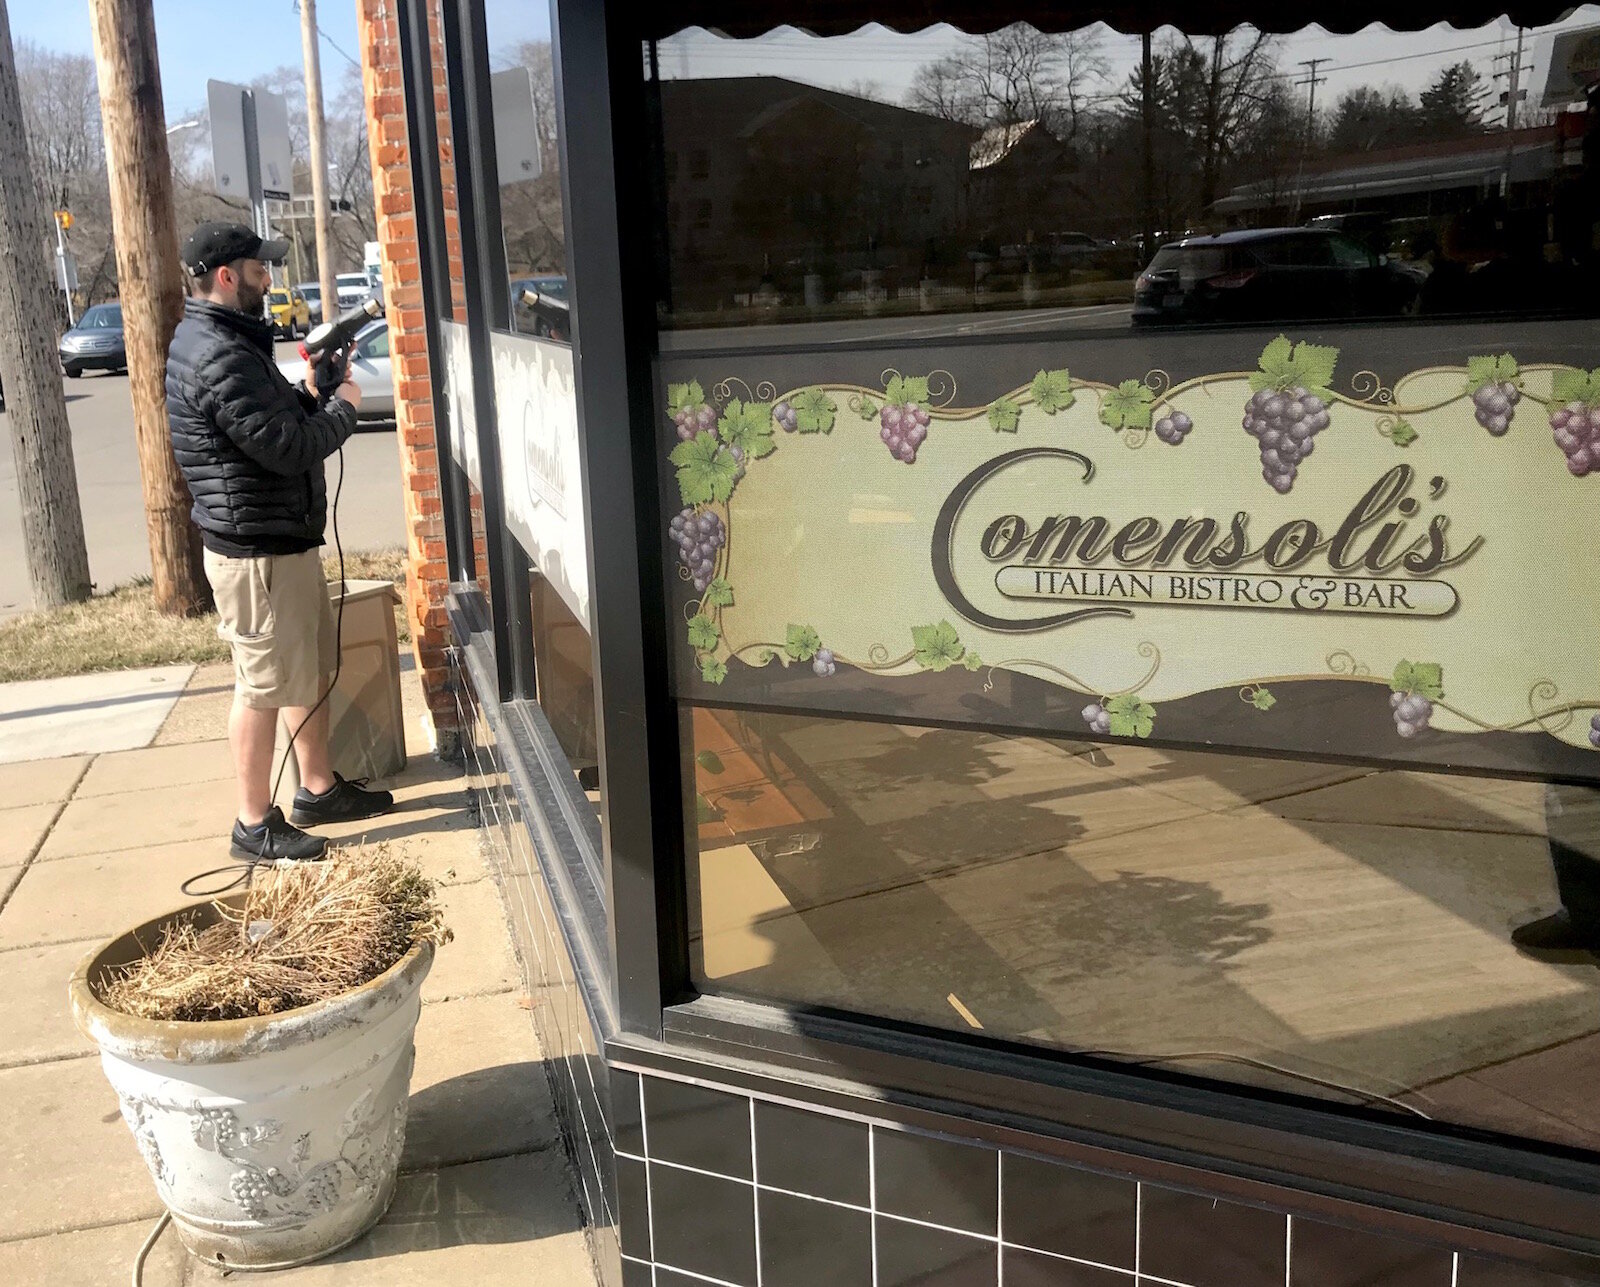 Along with the Stuart Avenue Bed & Breakfast, Comensoli’s Italian Bistro, at 762 W. Main St., may be one of the two most recognizable businesses in the Stuart Neighborhood, just east on downtown Kalamazoo..